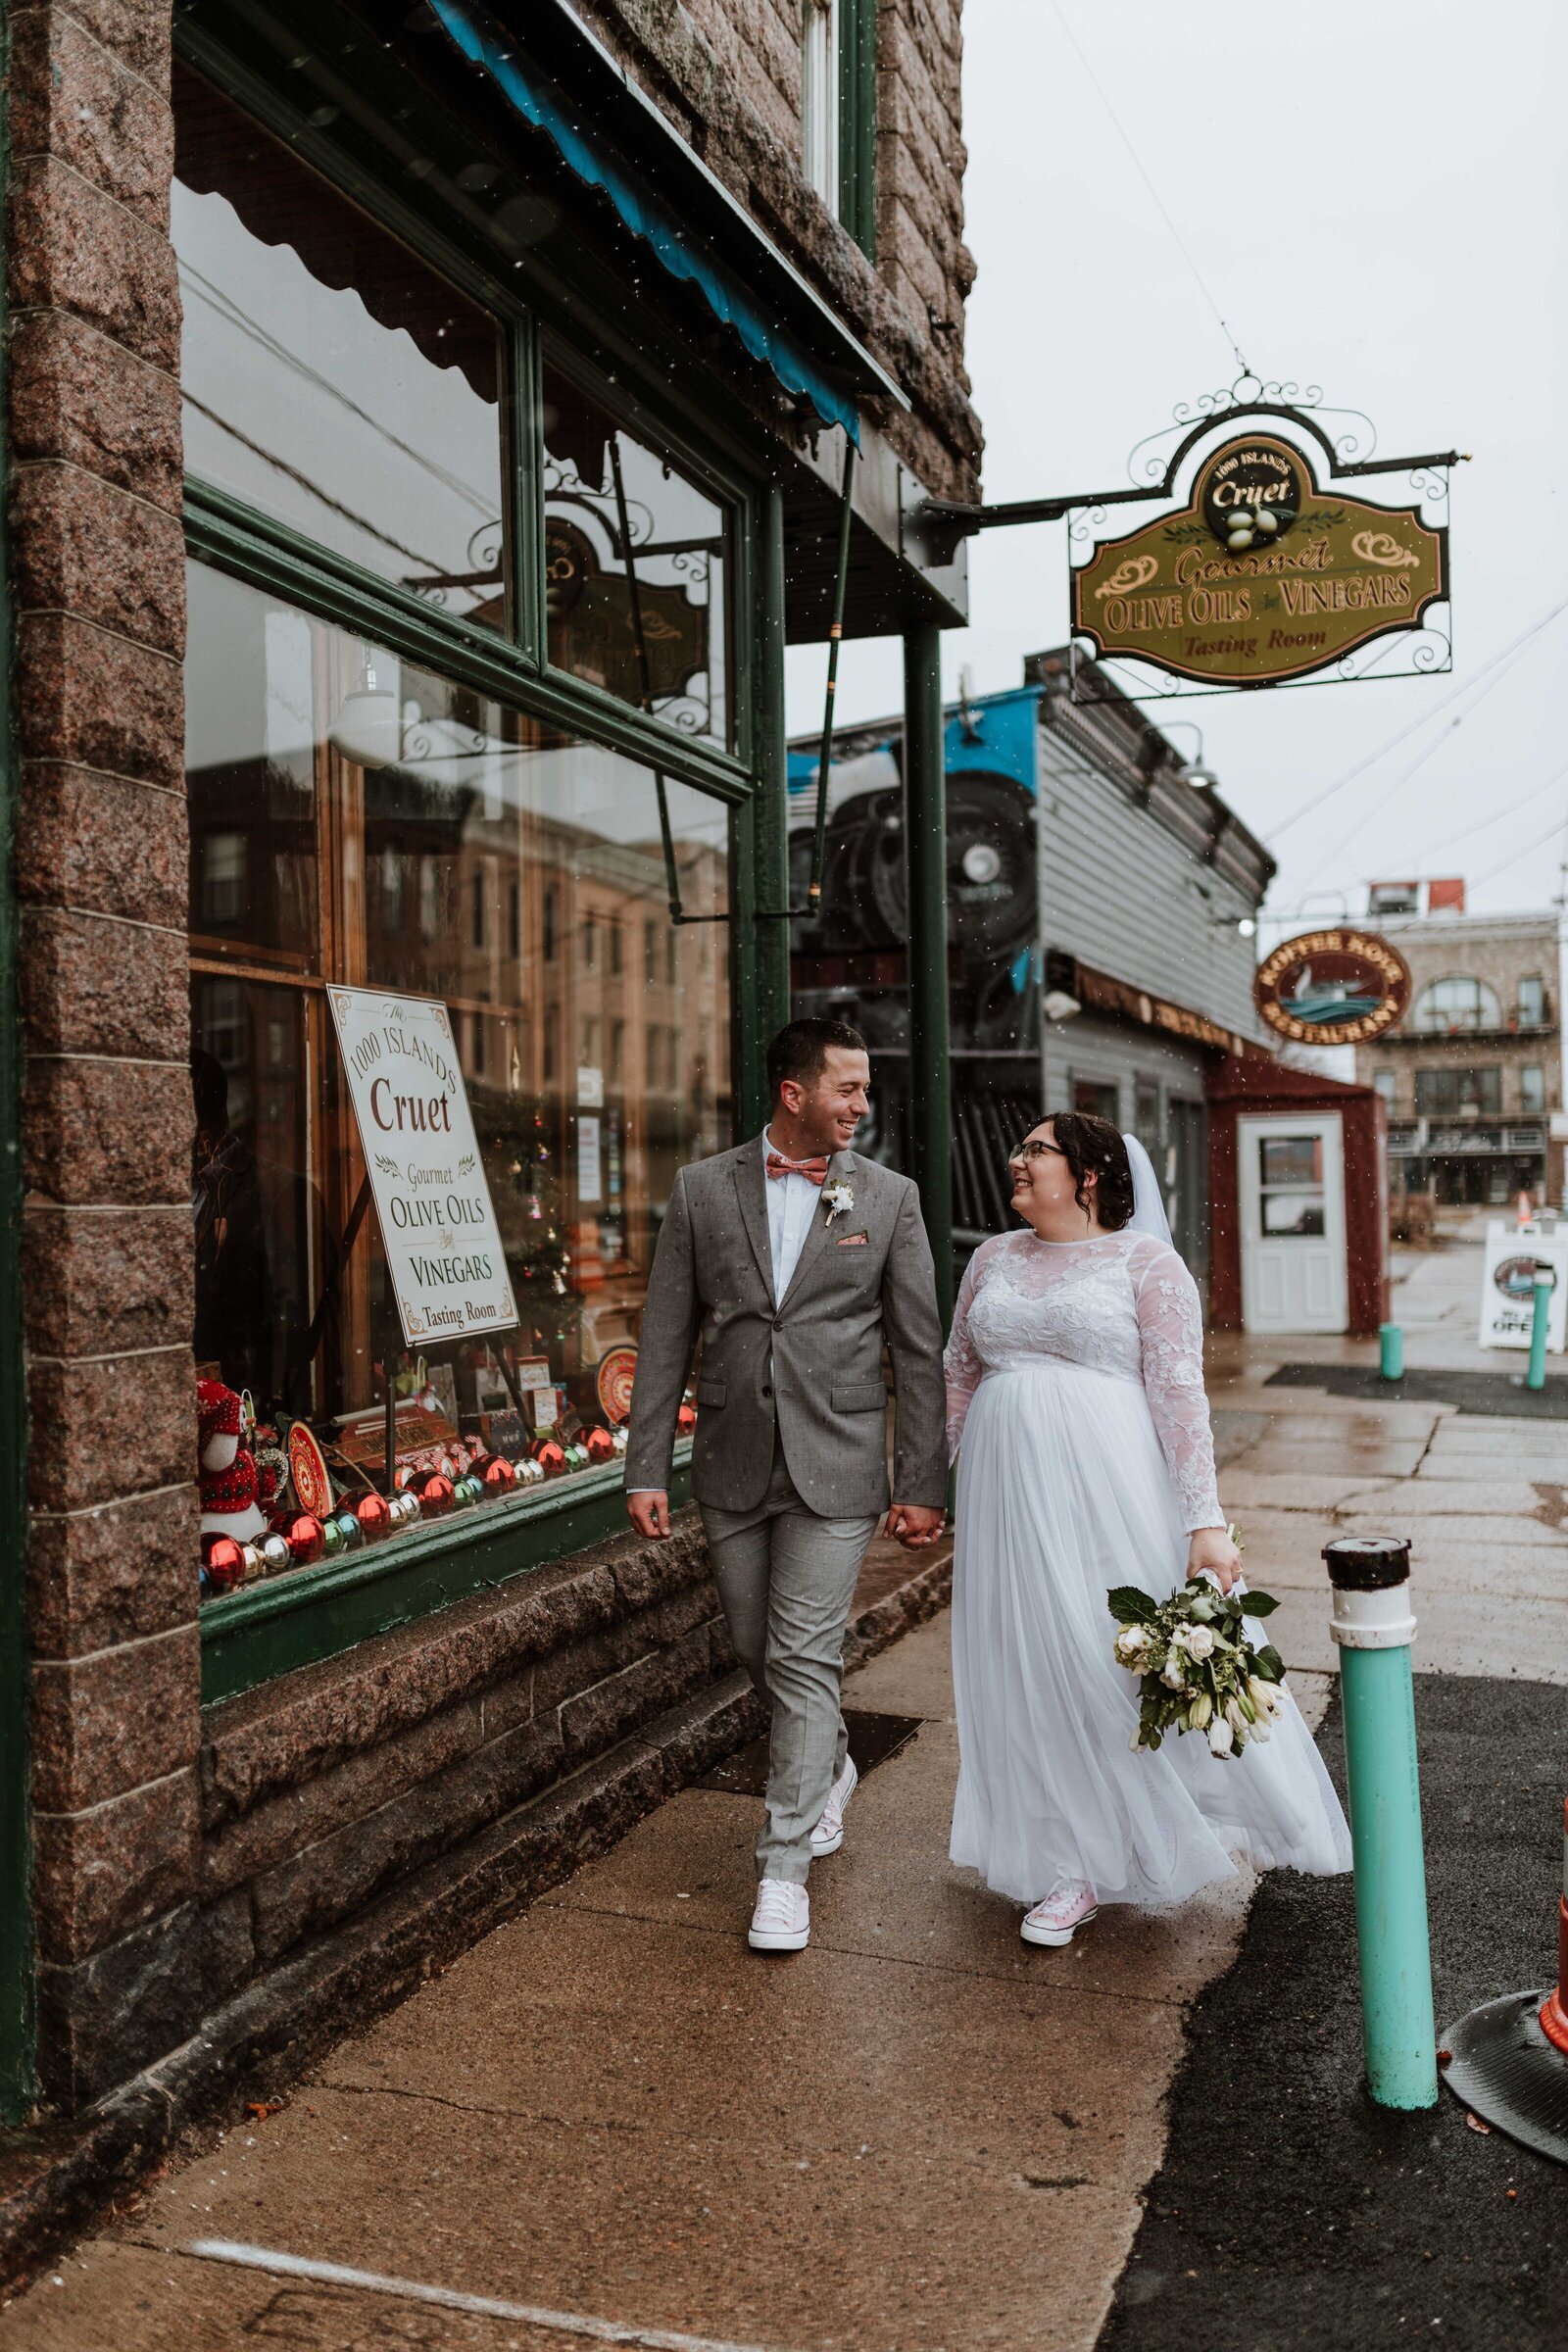 Eloping couple in Clayton, NY in the winter